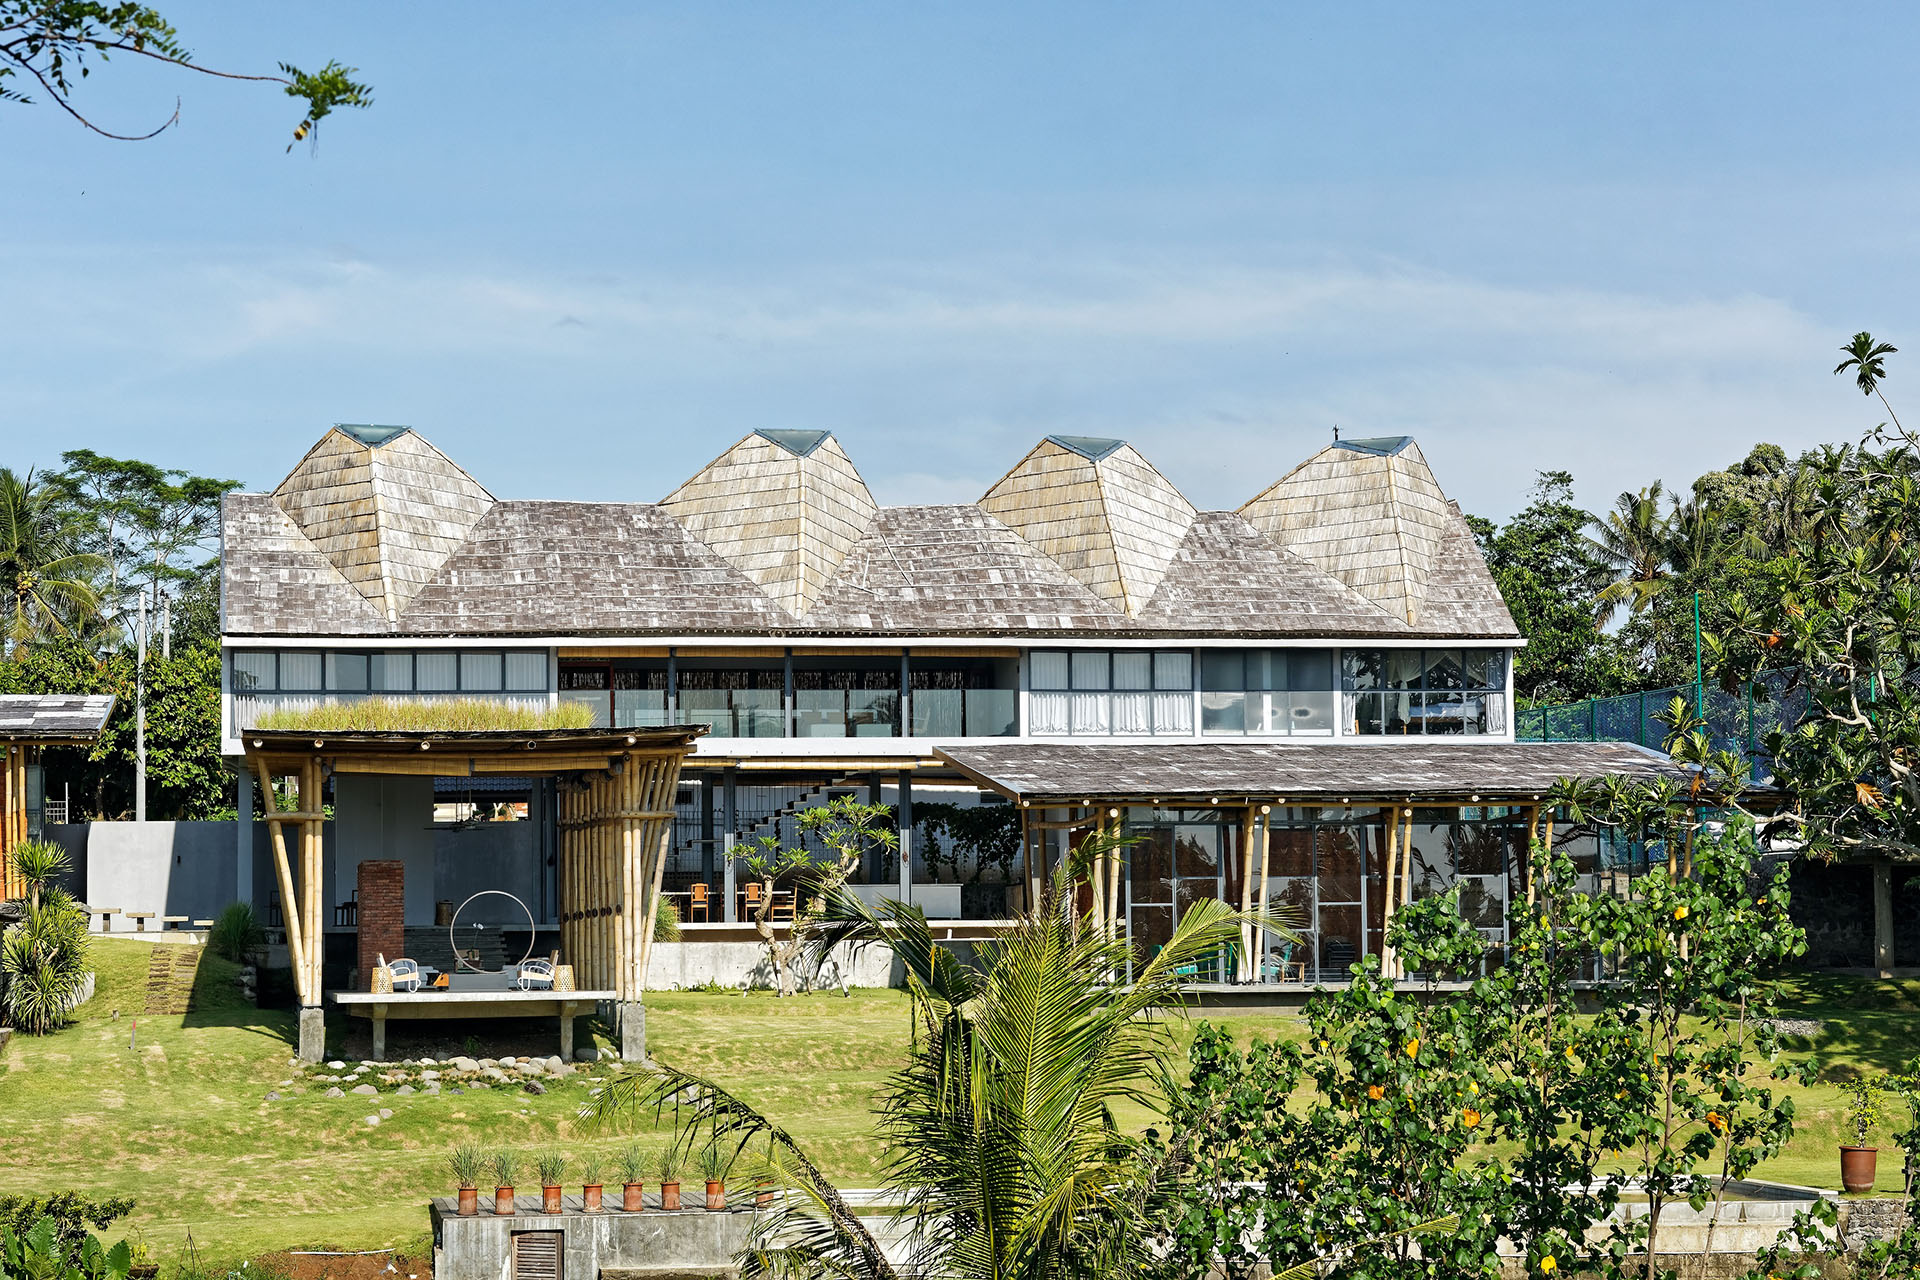 <p>The spatial arrangement of this four-bedroom house revolves around the Balinese architectural concept of Tri Mandala, signifying three realms: Nista Mandala (outermost, least sacred); Madya Mandala (intermediate); and Utama Mandala (innermost, most sacred).</p>